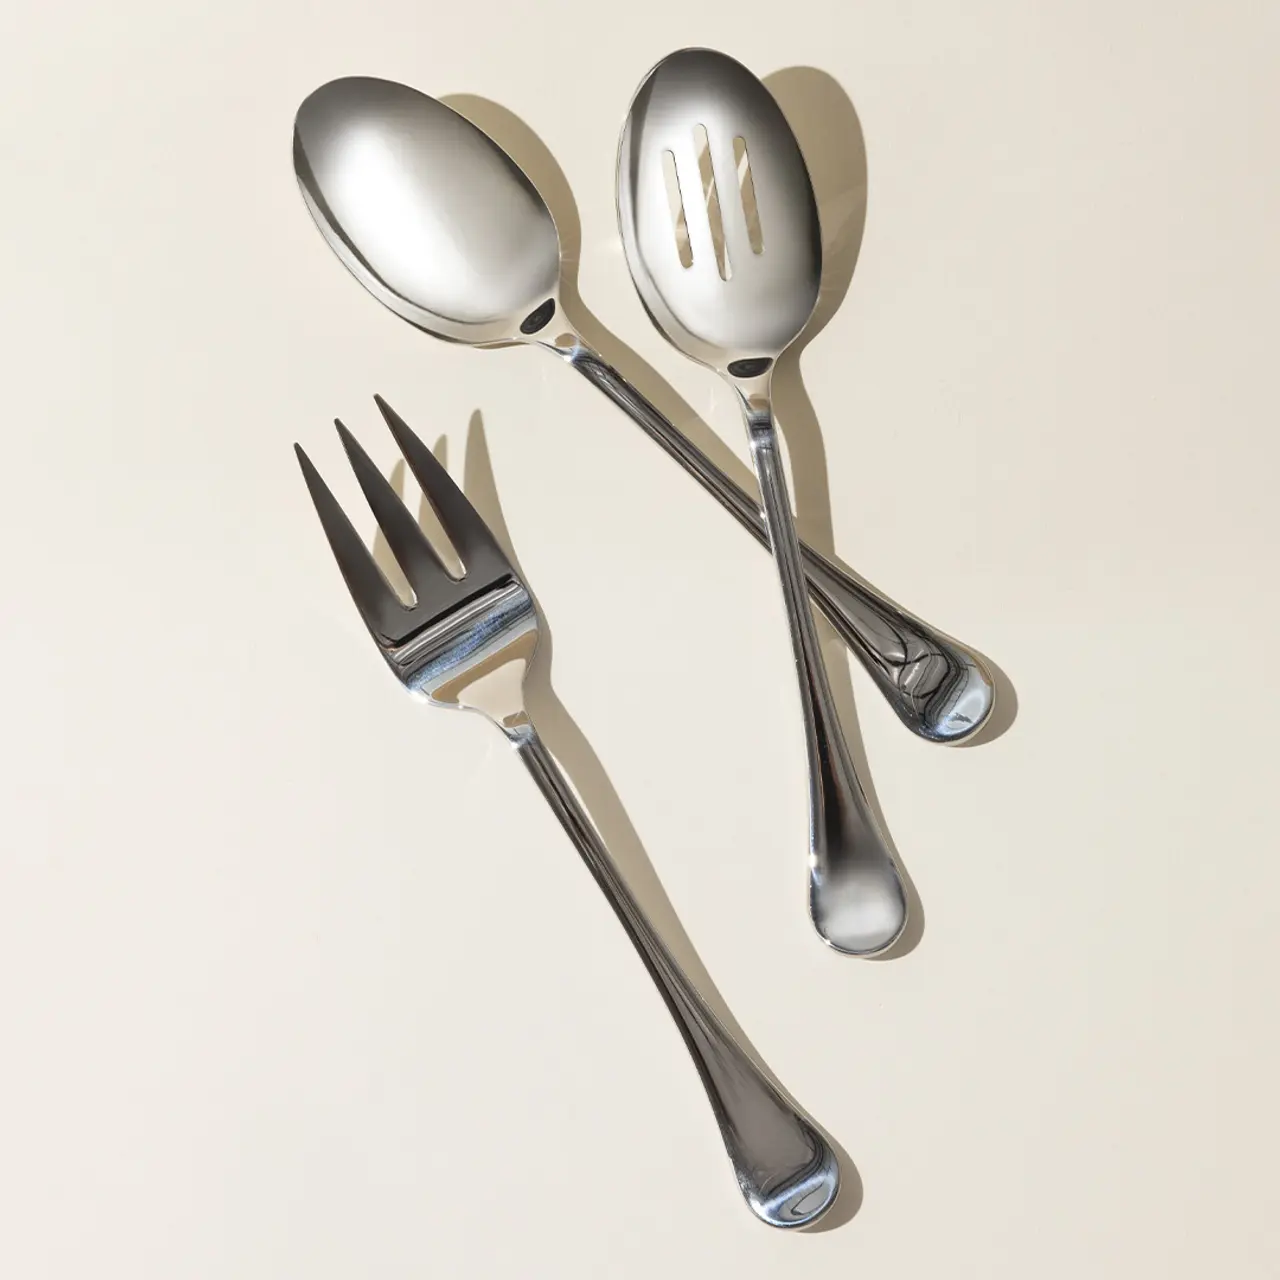 A set of stainless steel cutlery consisting of a fork, a spoon, and a slotted spoon arranged on a neutral background.